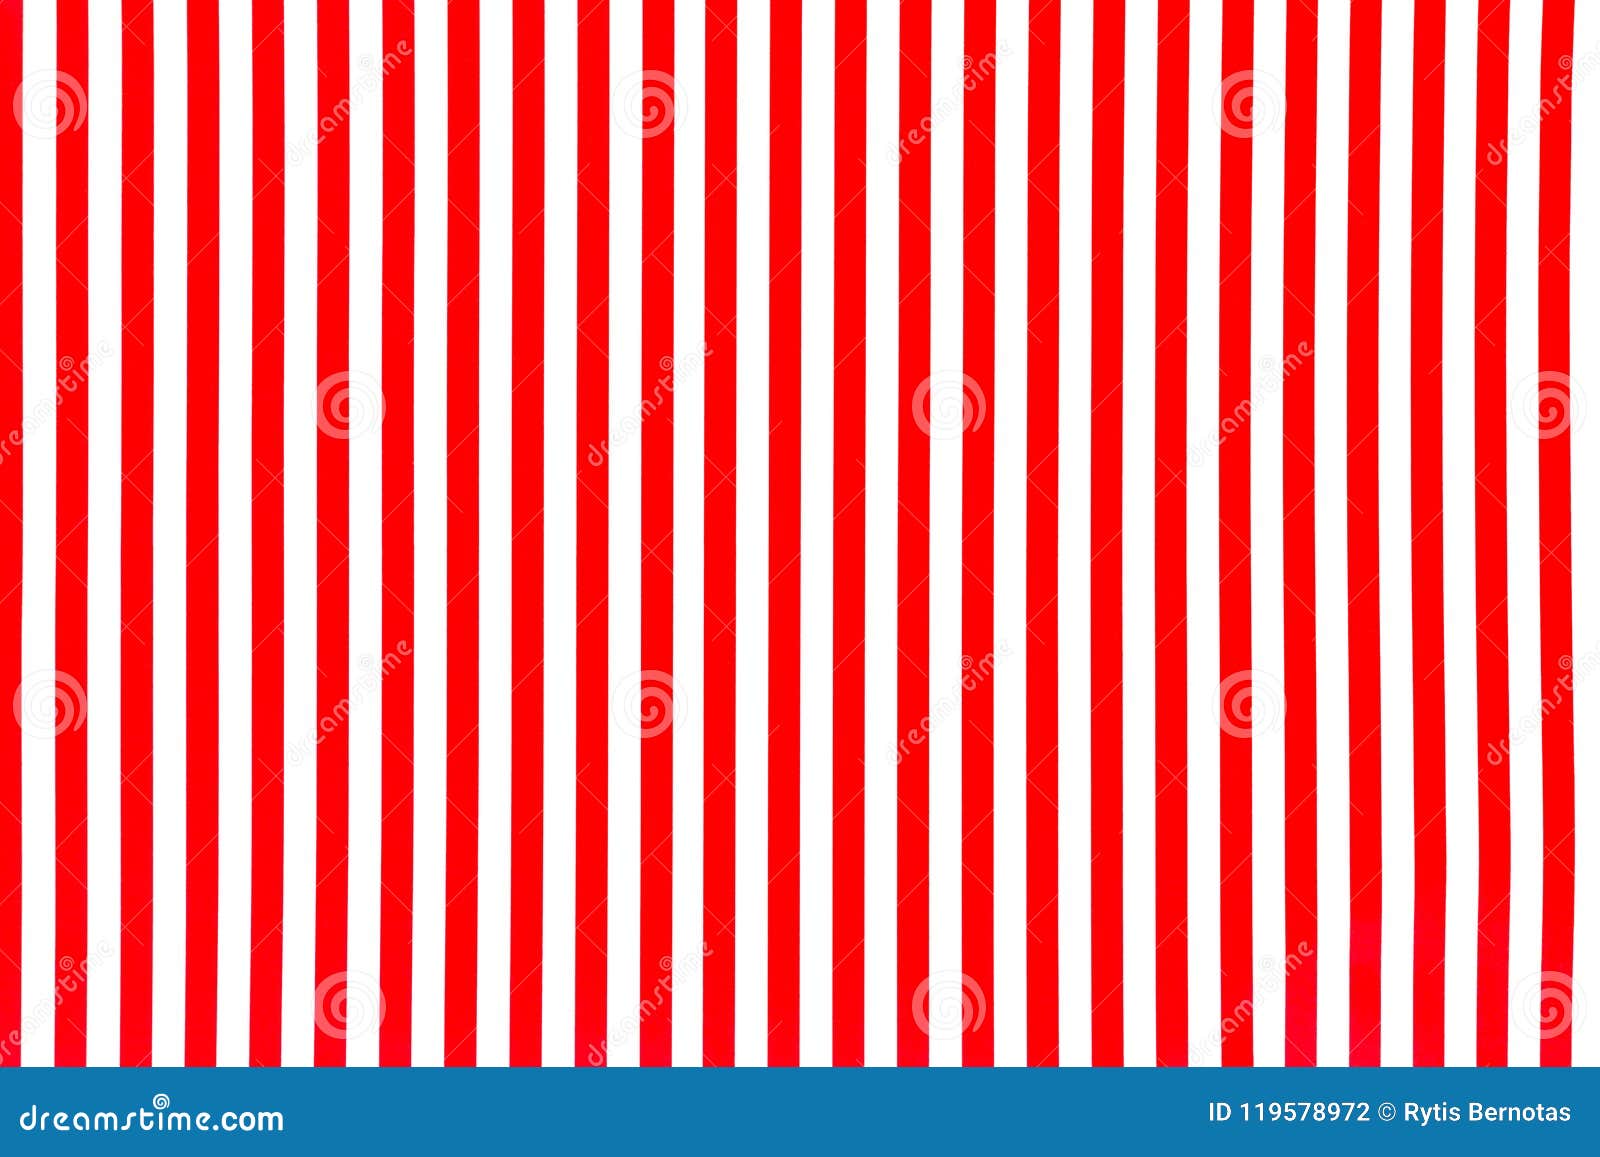 White And Red Striped Background Surface Stock Photo - Image of lines